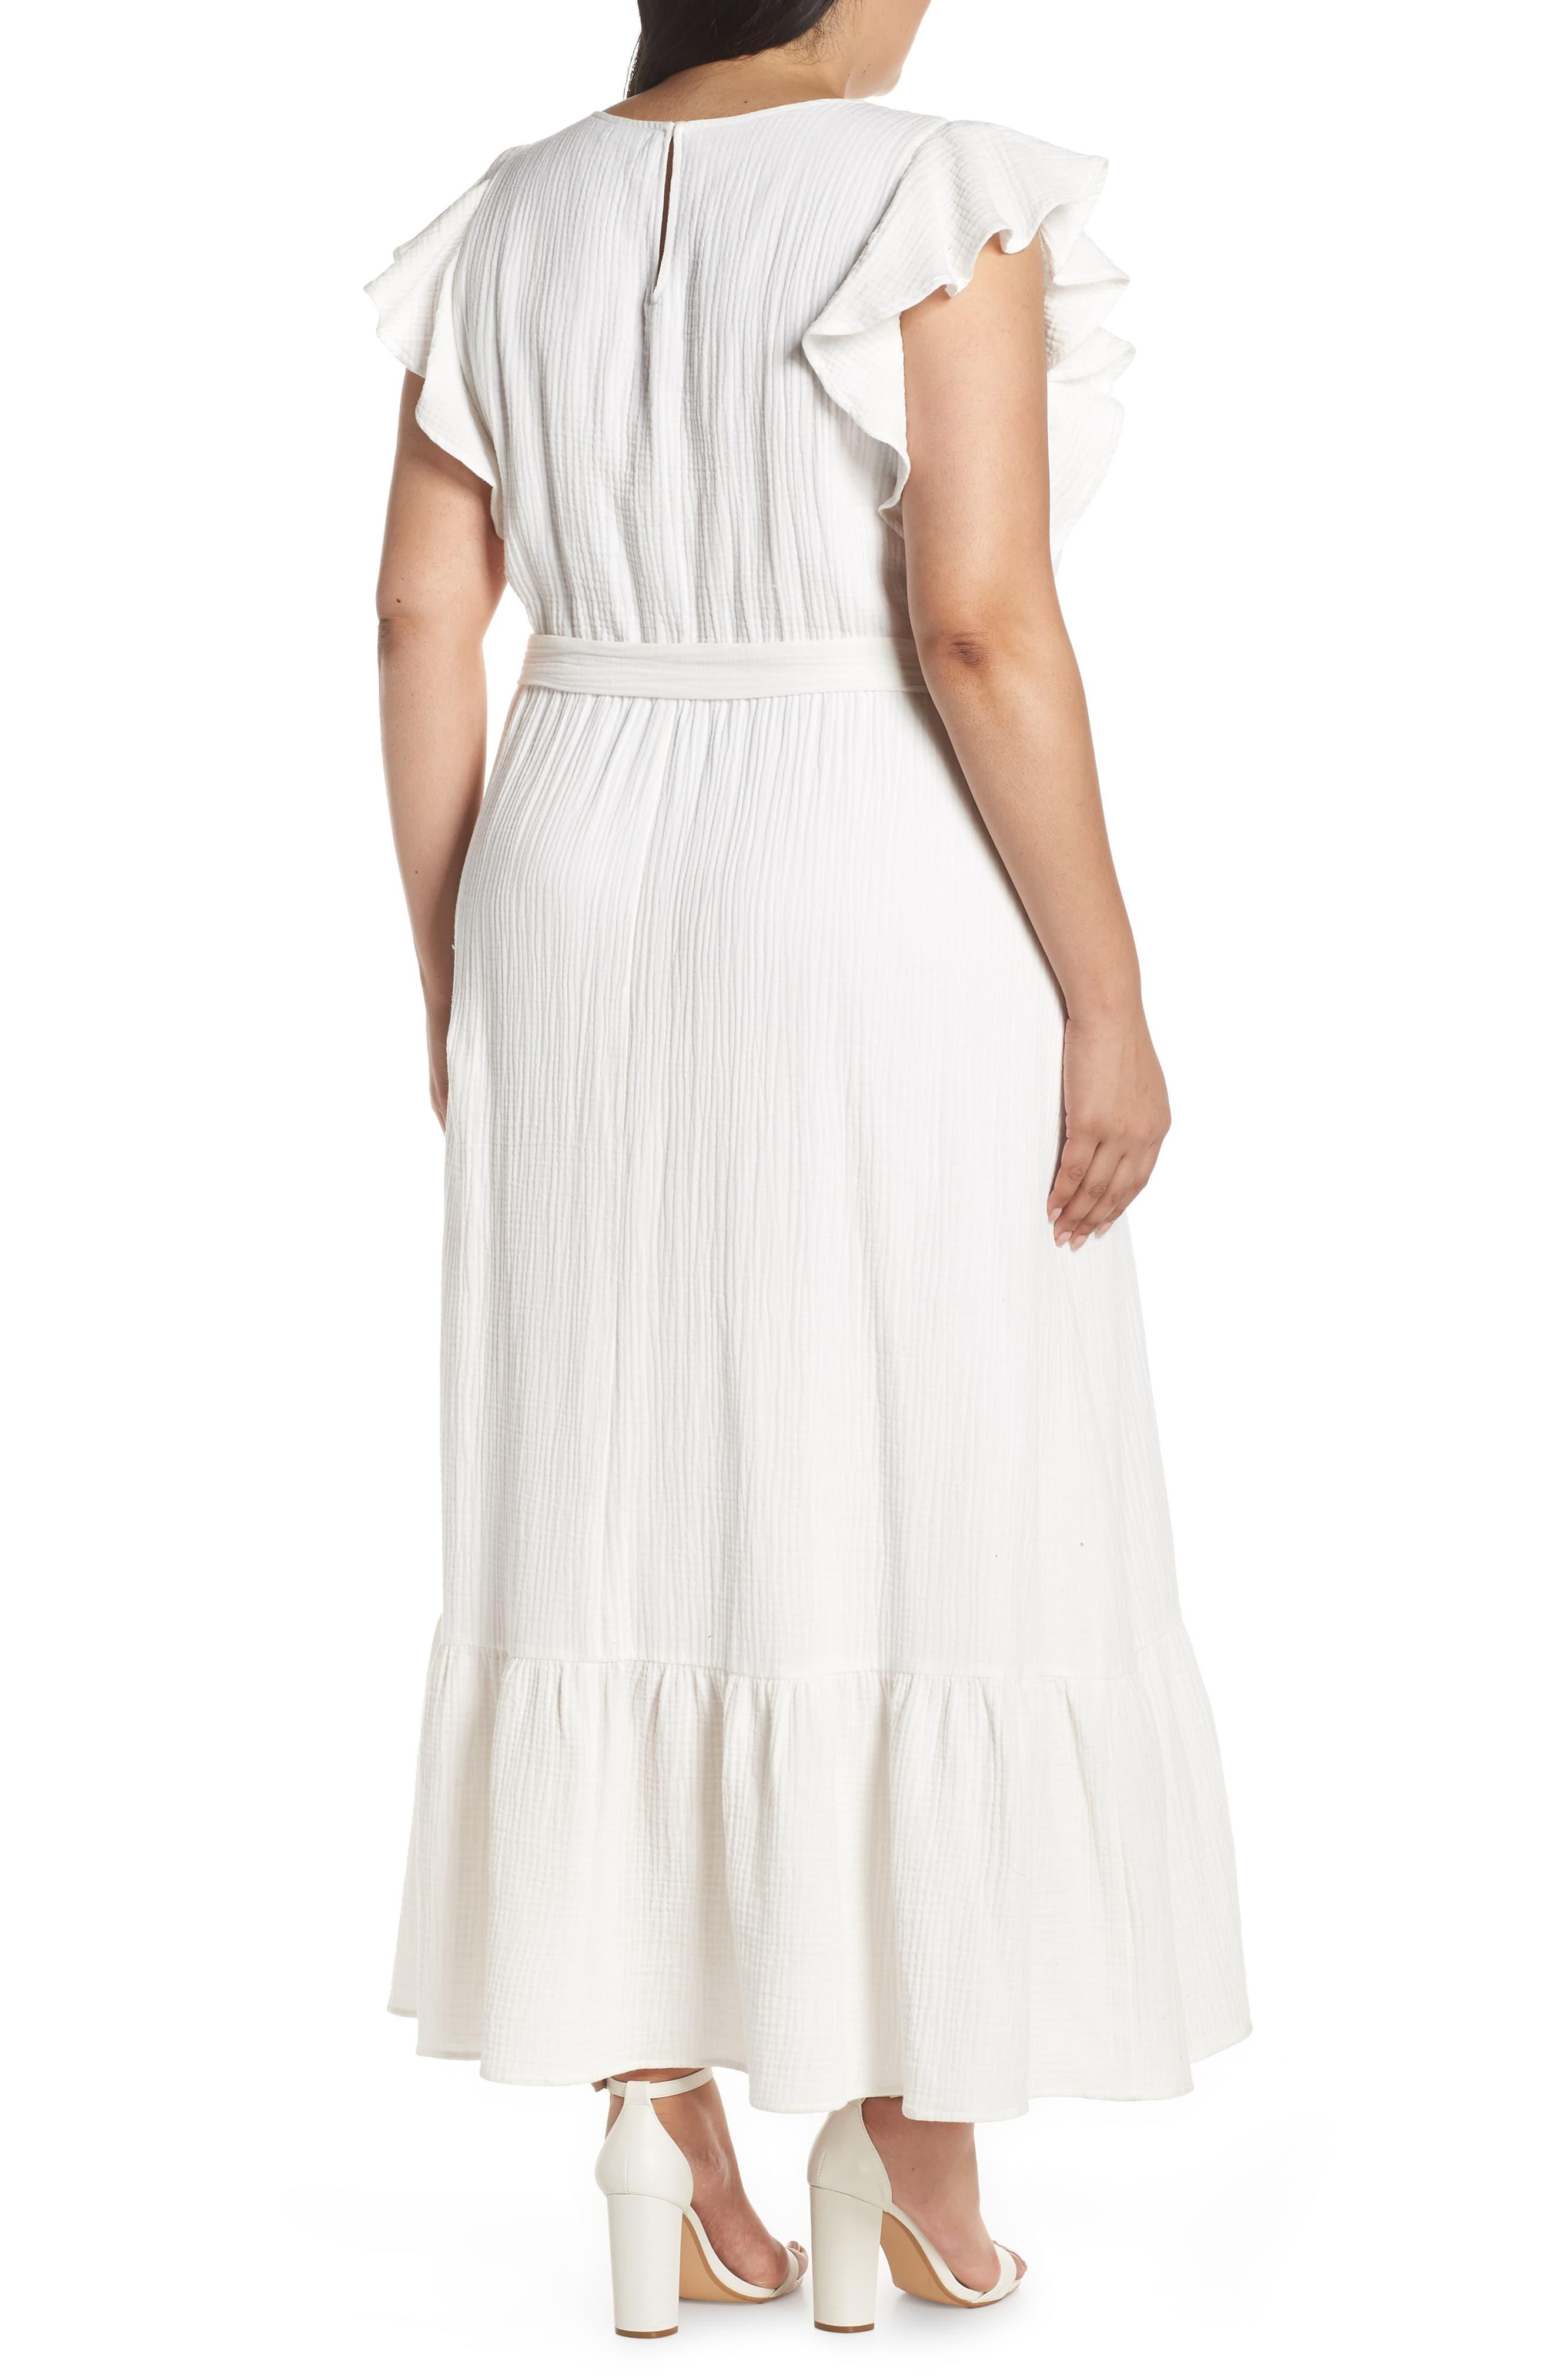 Chelsea28 Ruffle Sleeve Cotton Maxi Dress in White - Lyst